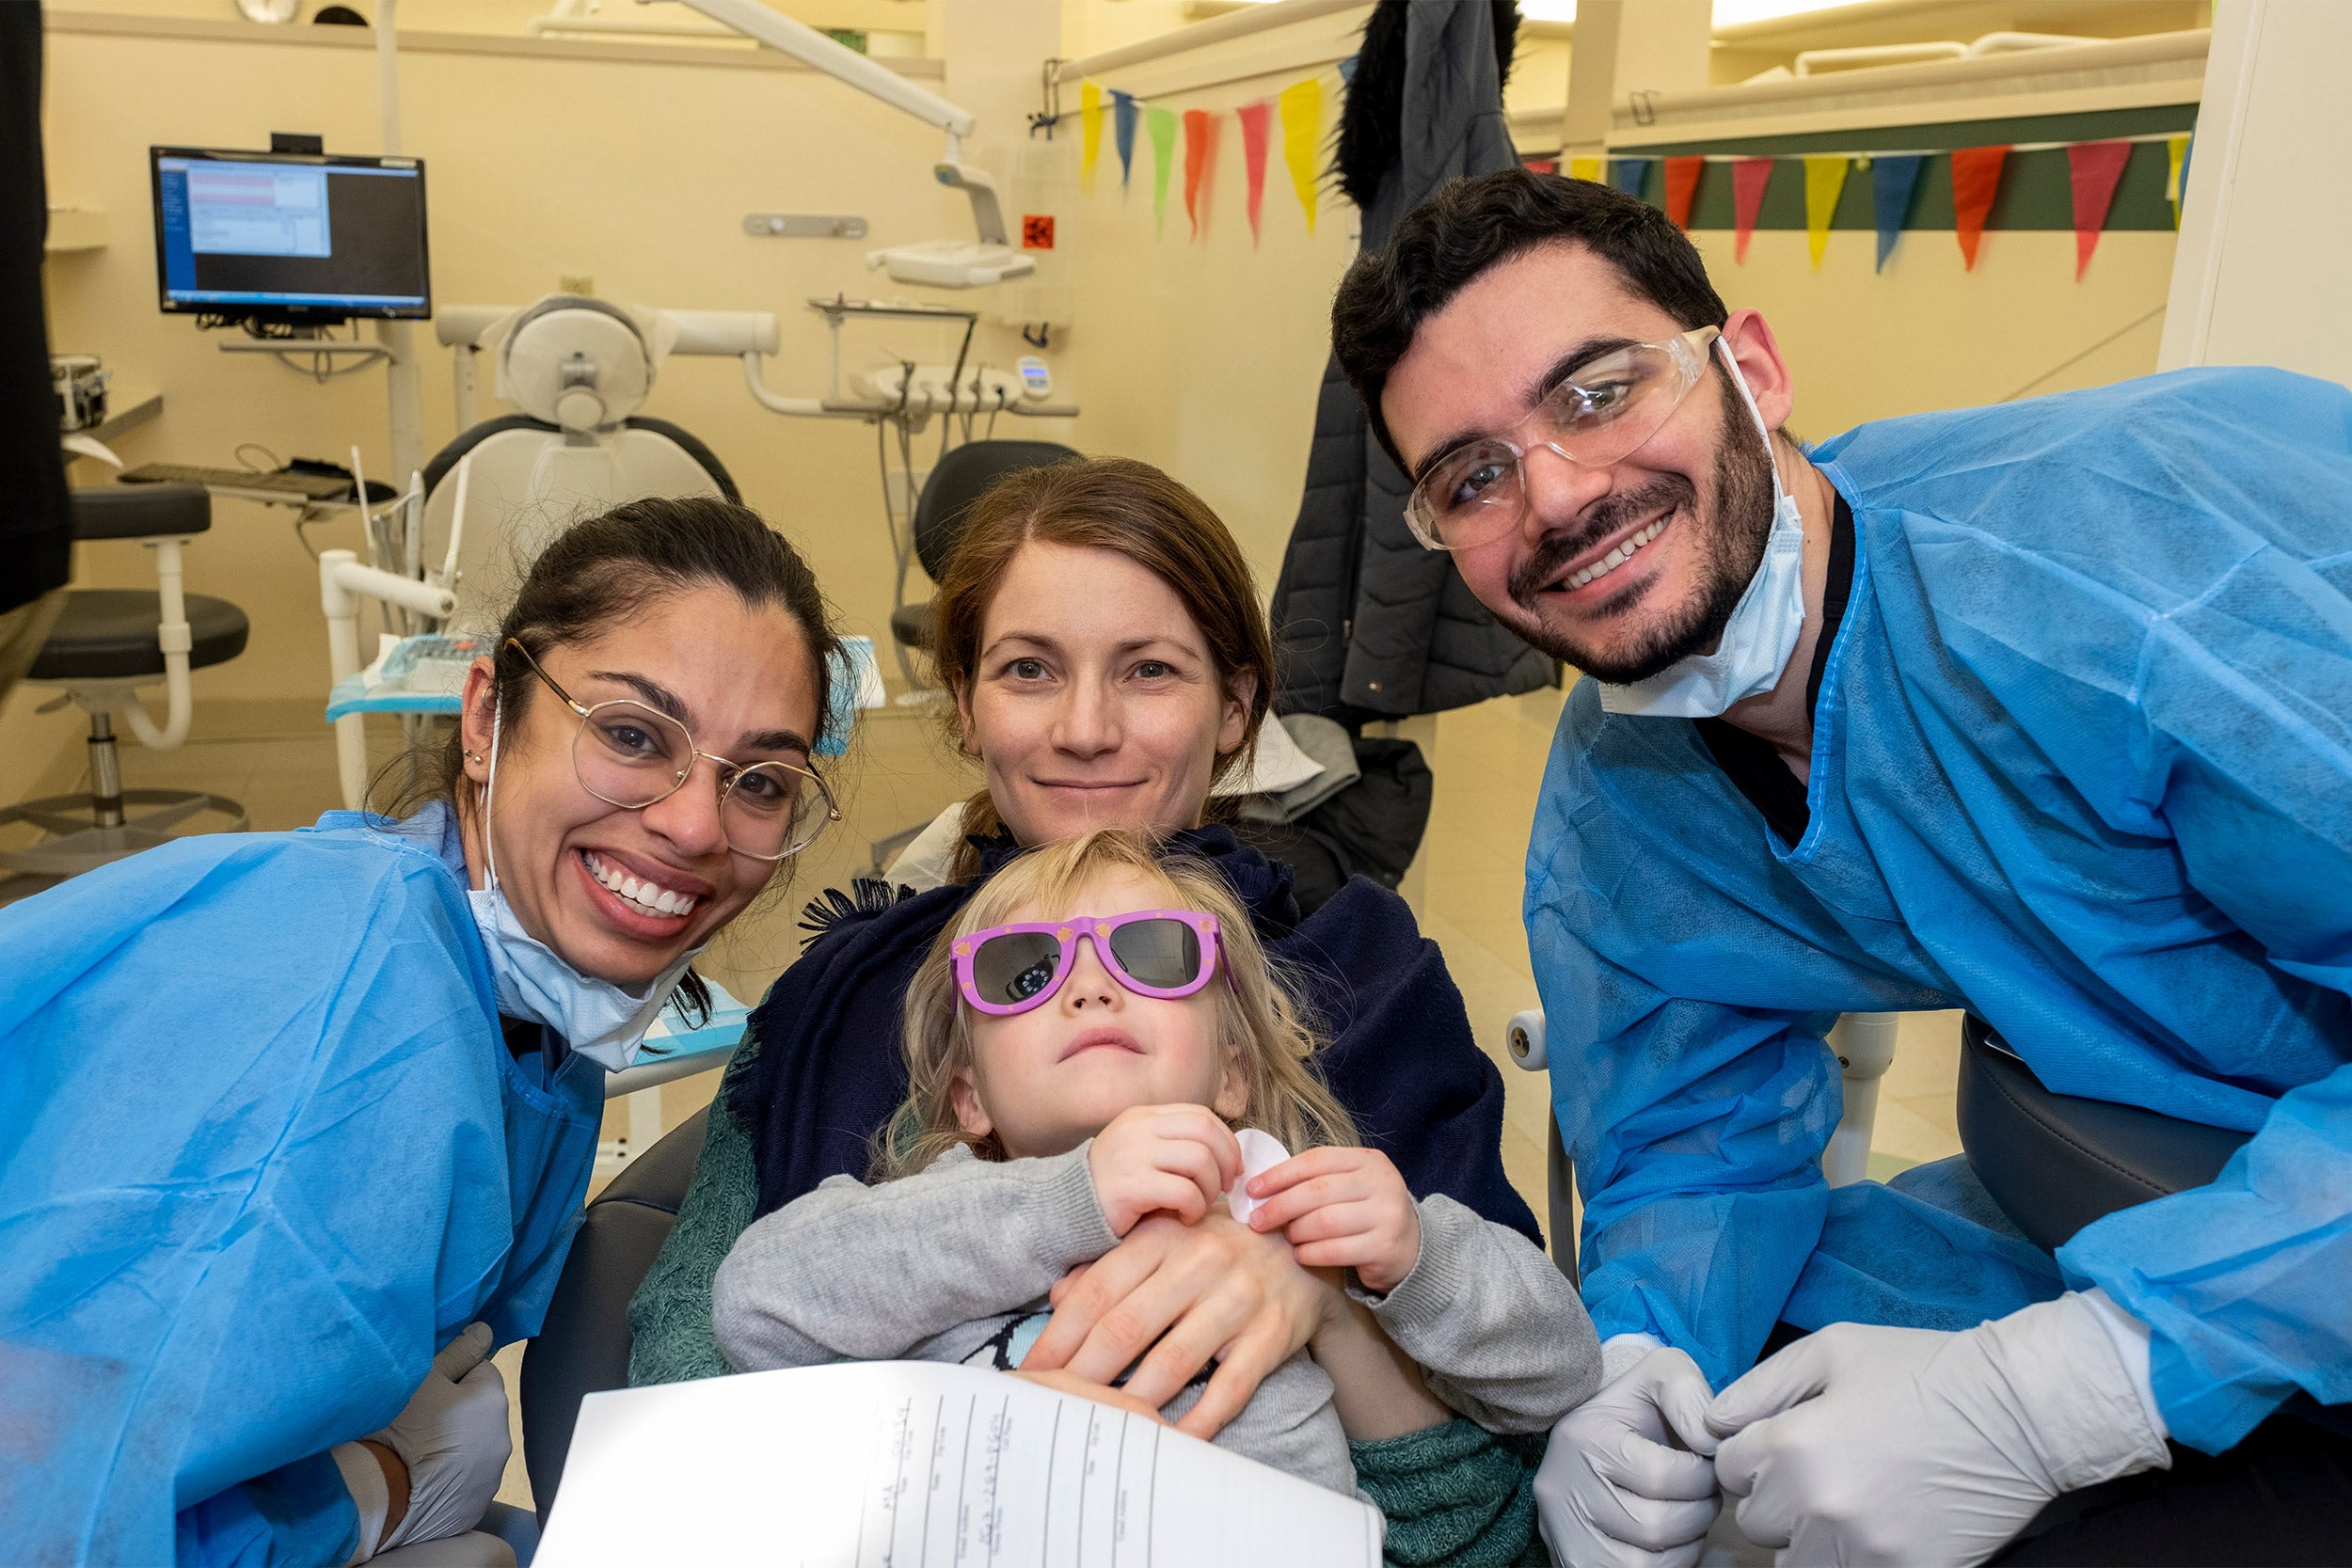 Ashiana Jivraj with other Dental School students and a young patient.